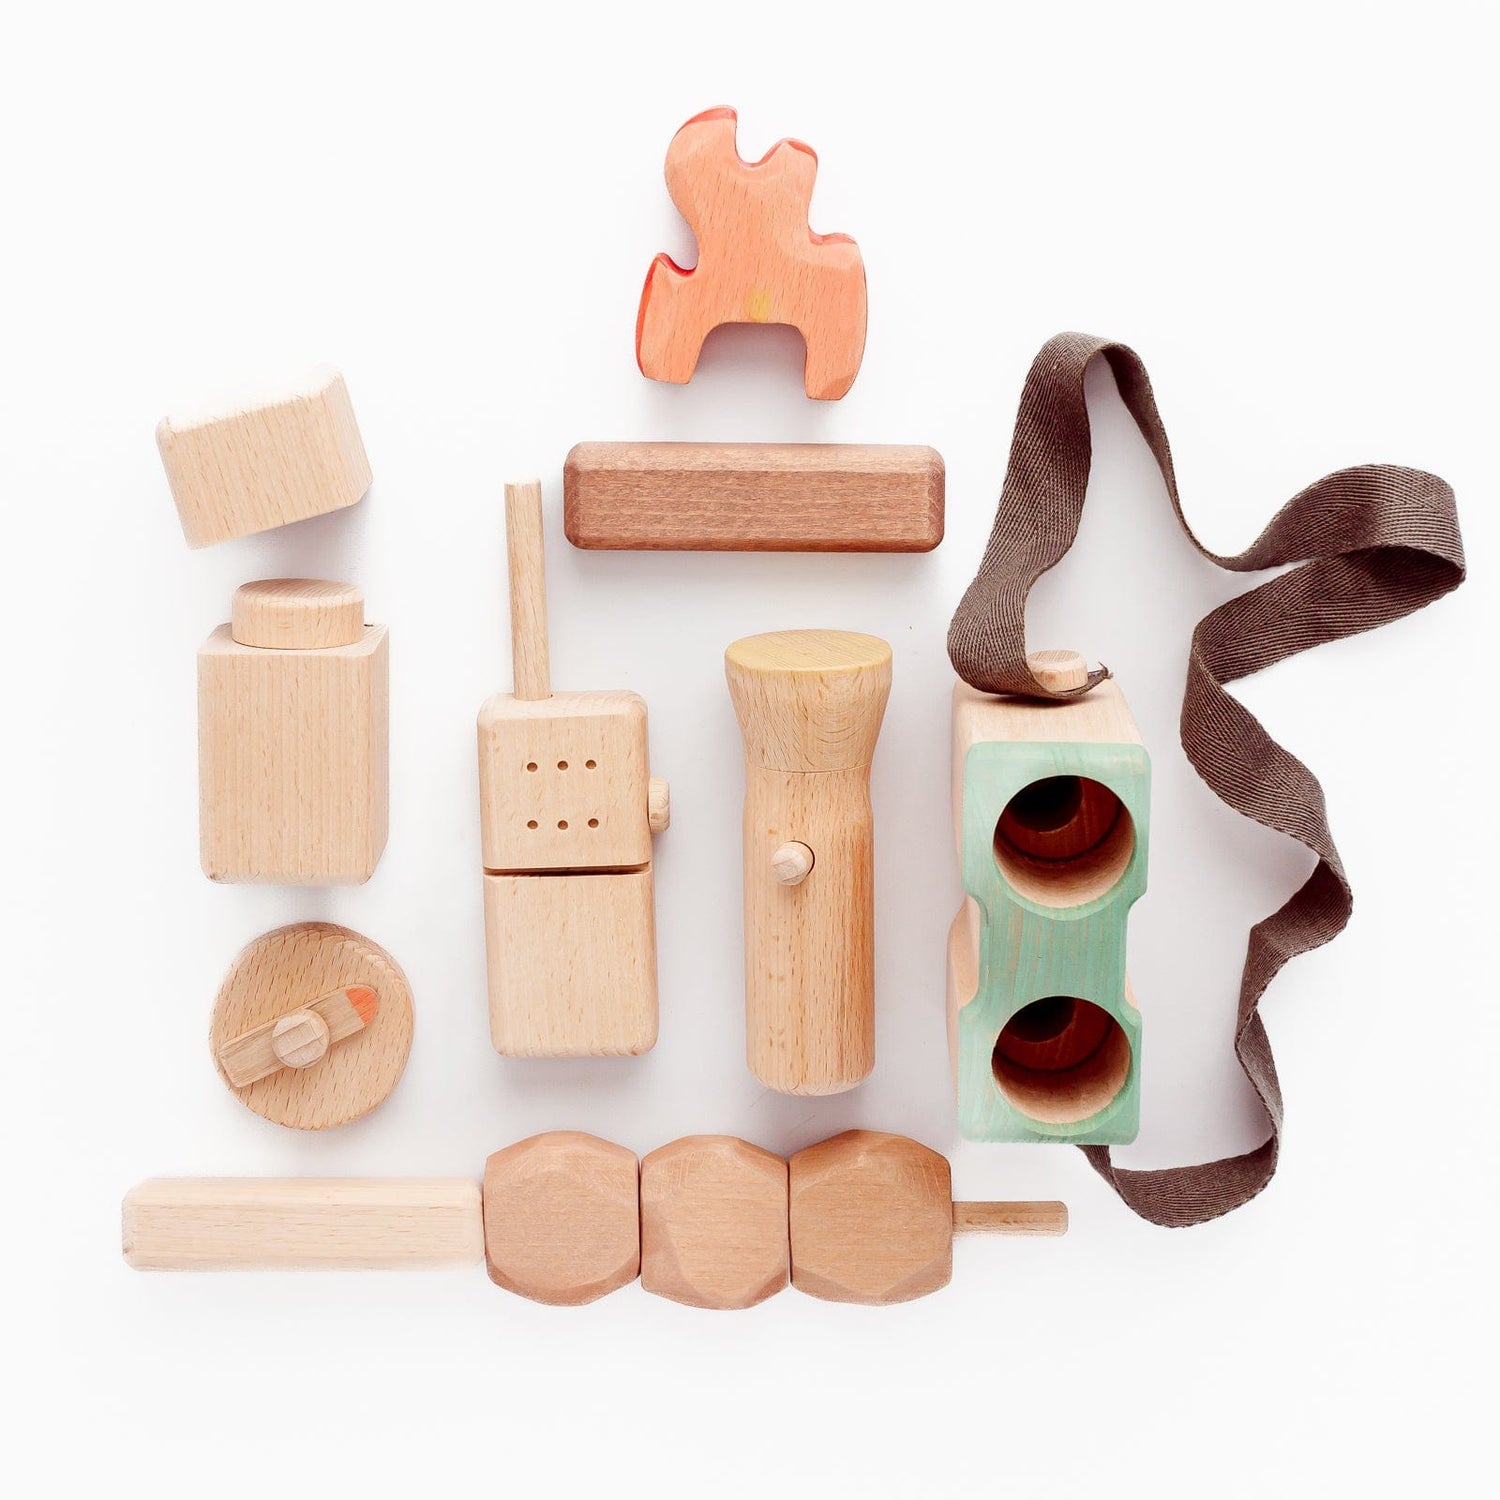 4OurBaby Wooden Toys Wooden Explorer & Camping Set